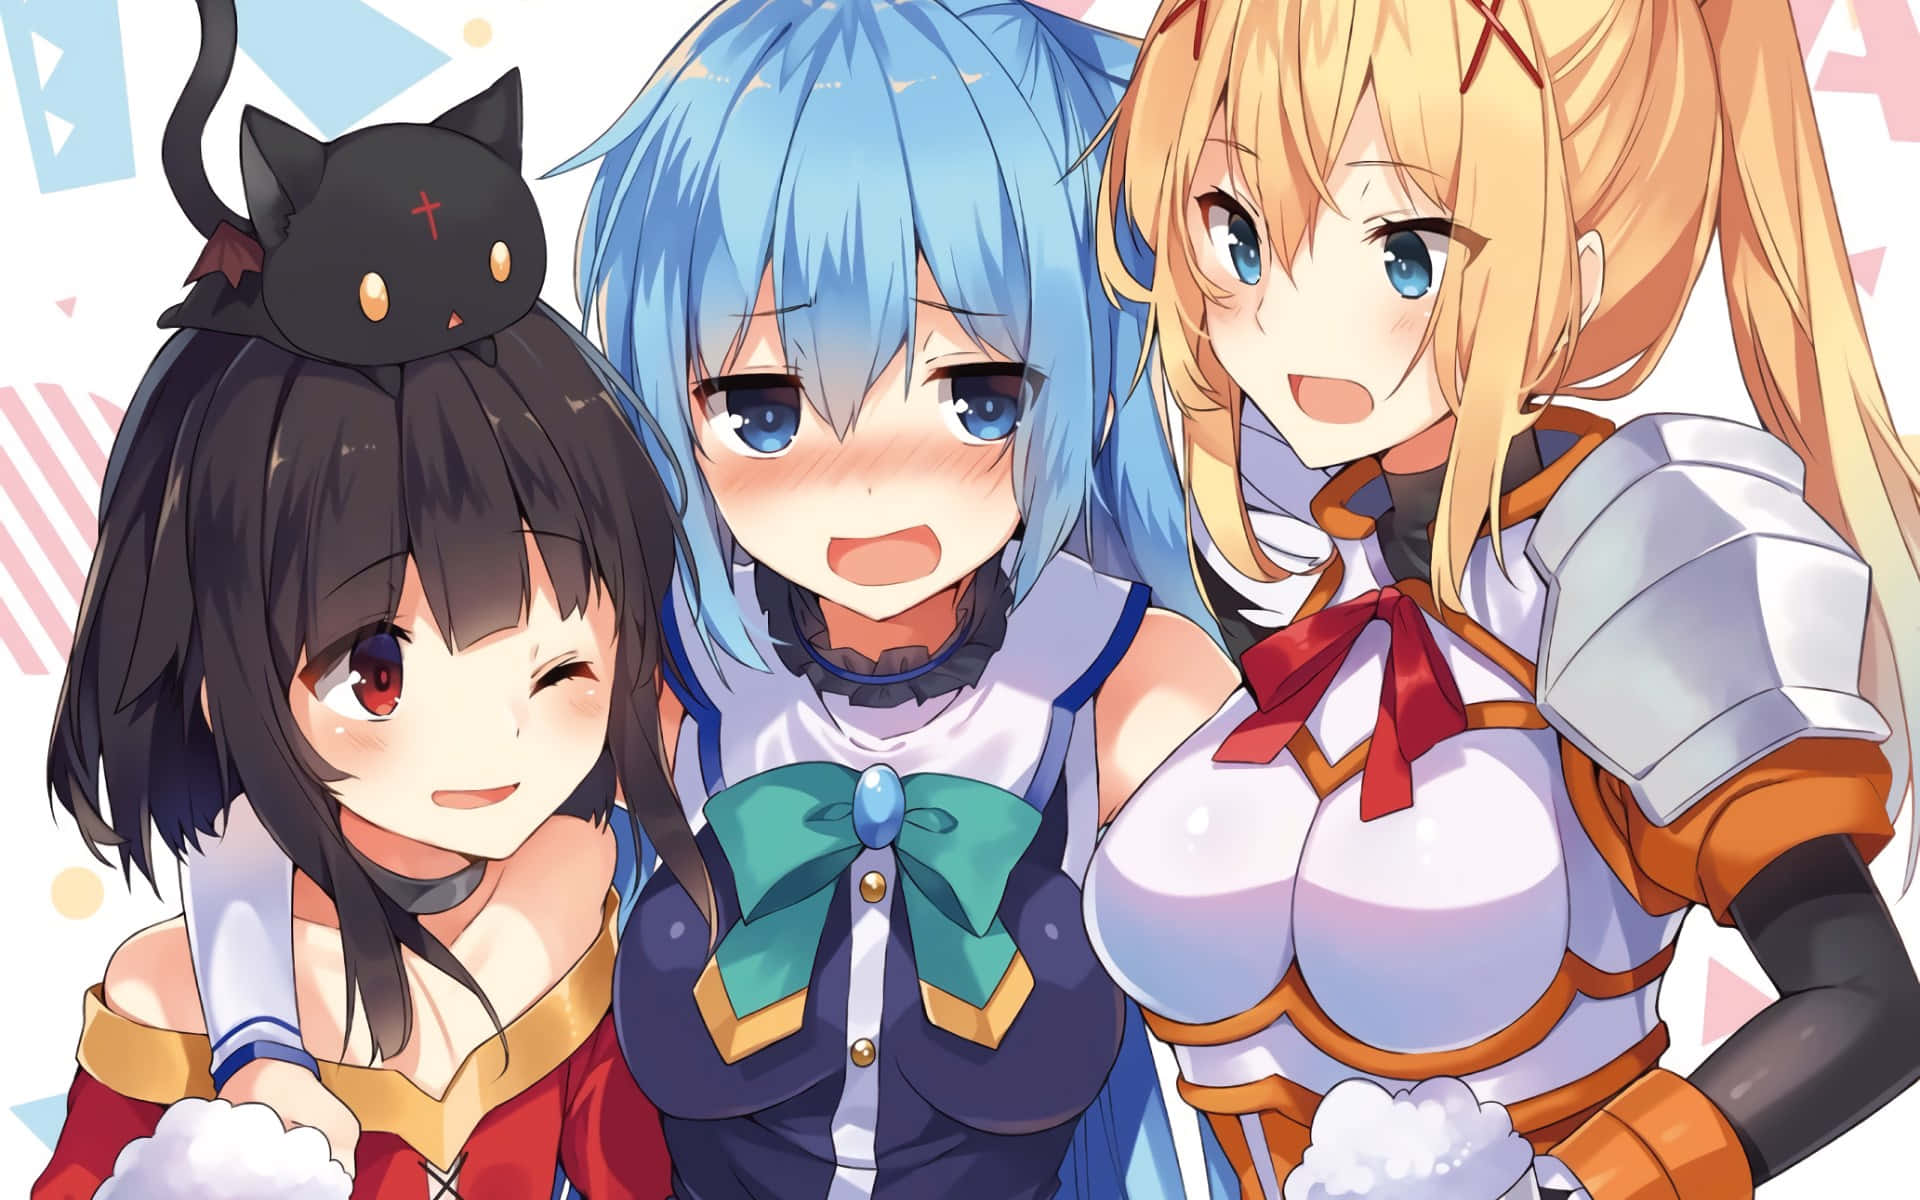 Join in the adventures of Kazuma, Aqua and their eccentric party in Konosuba Wallpaper